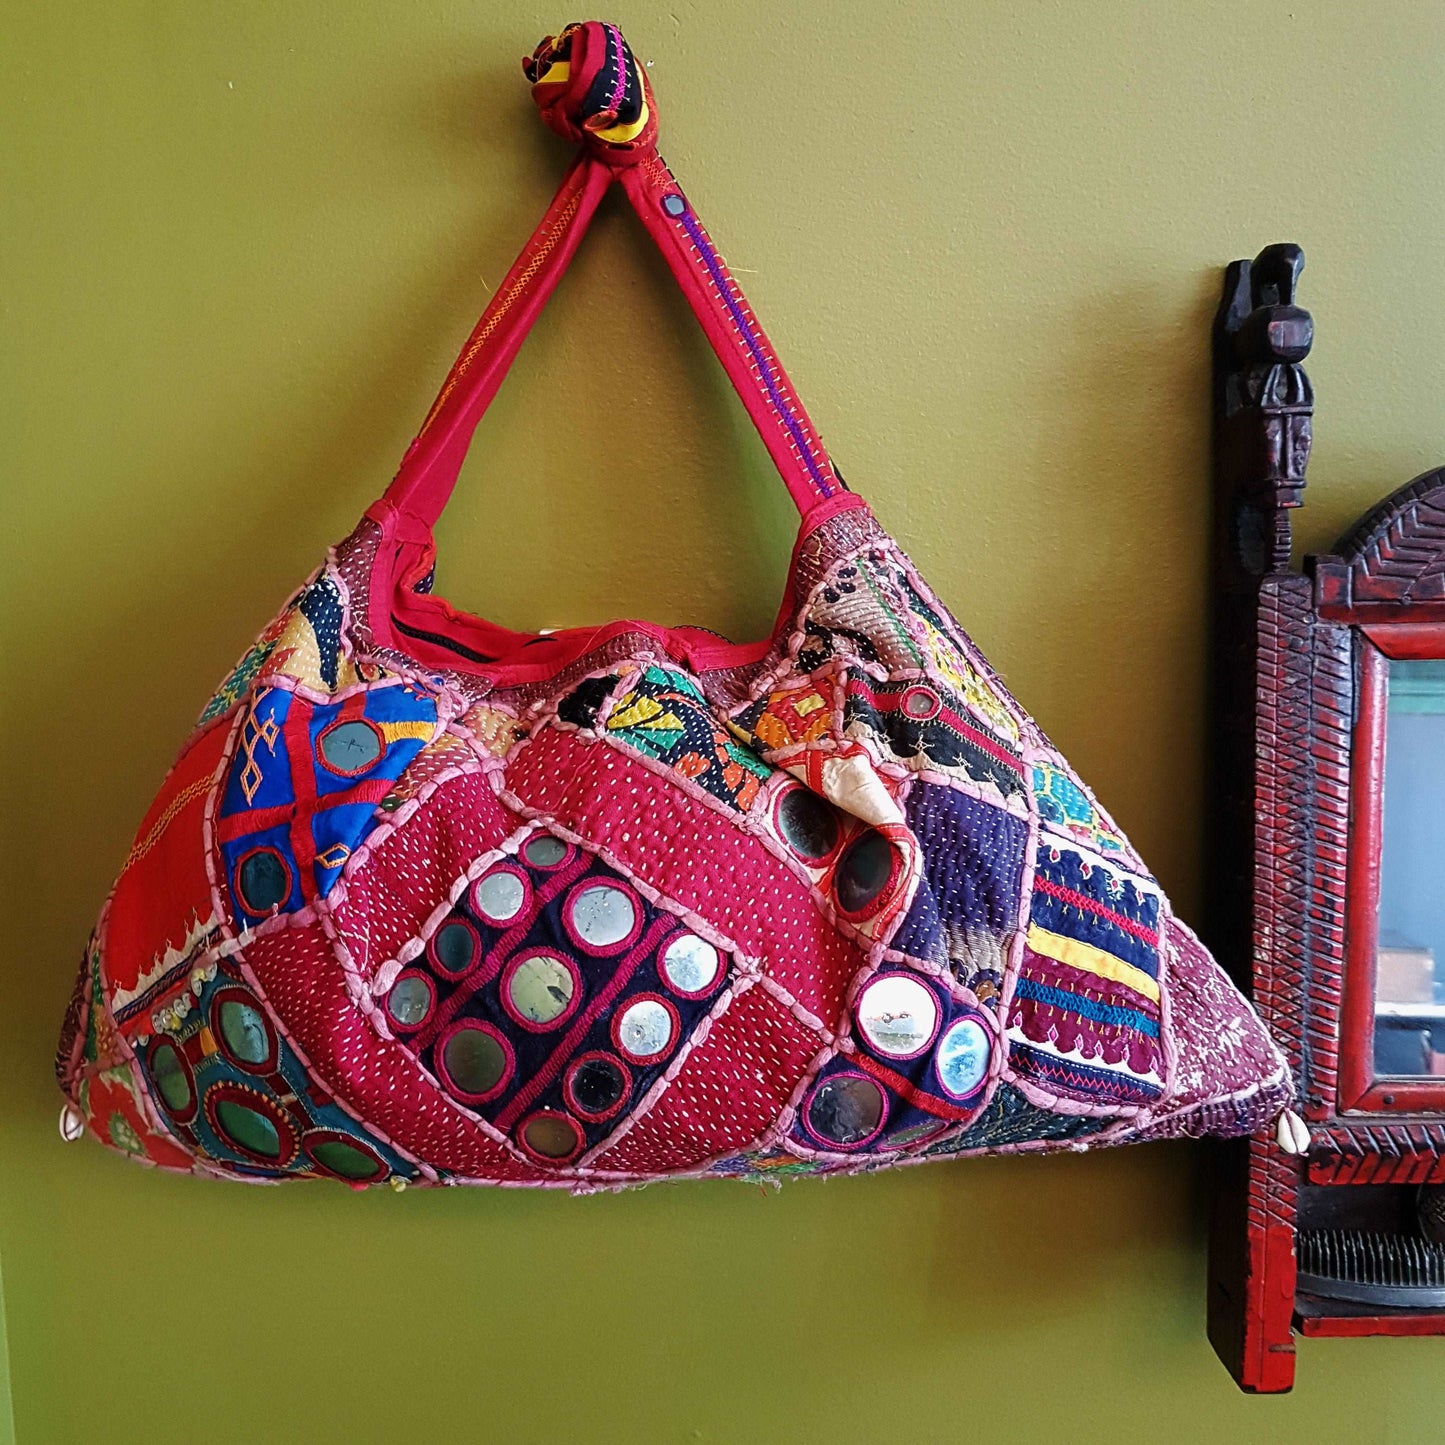 Banjara shoulder bag. Authentic vintage tribal gypsy dowry bag in red & royal blue with hand embroidery. Spectacular mirrorwork decoration.